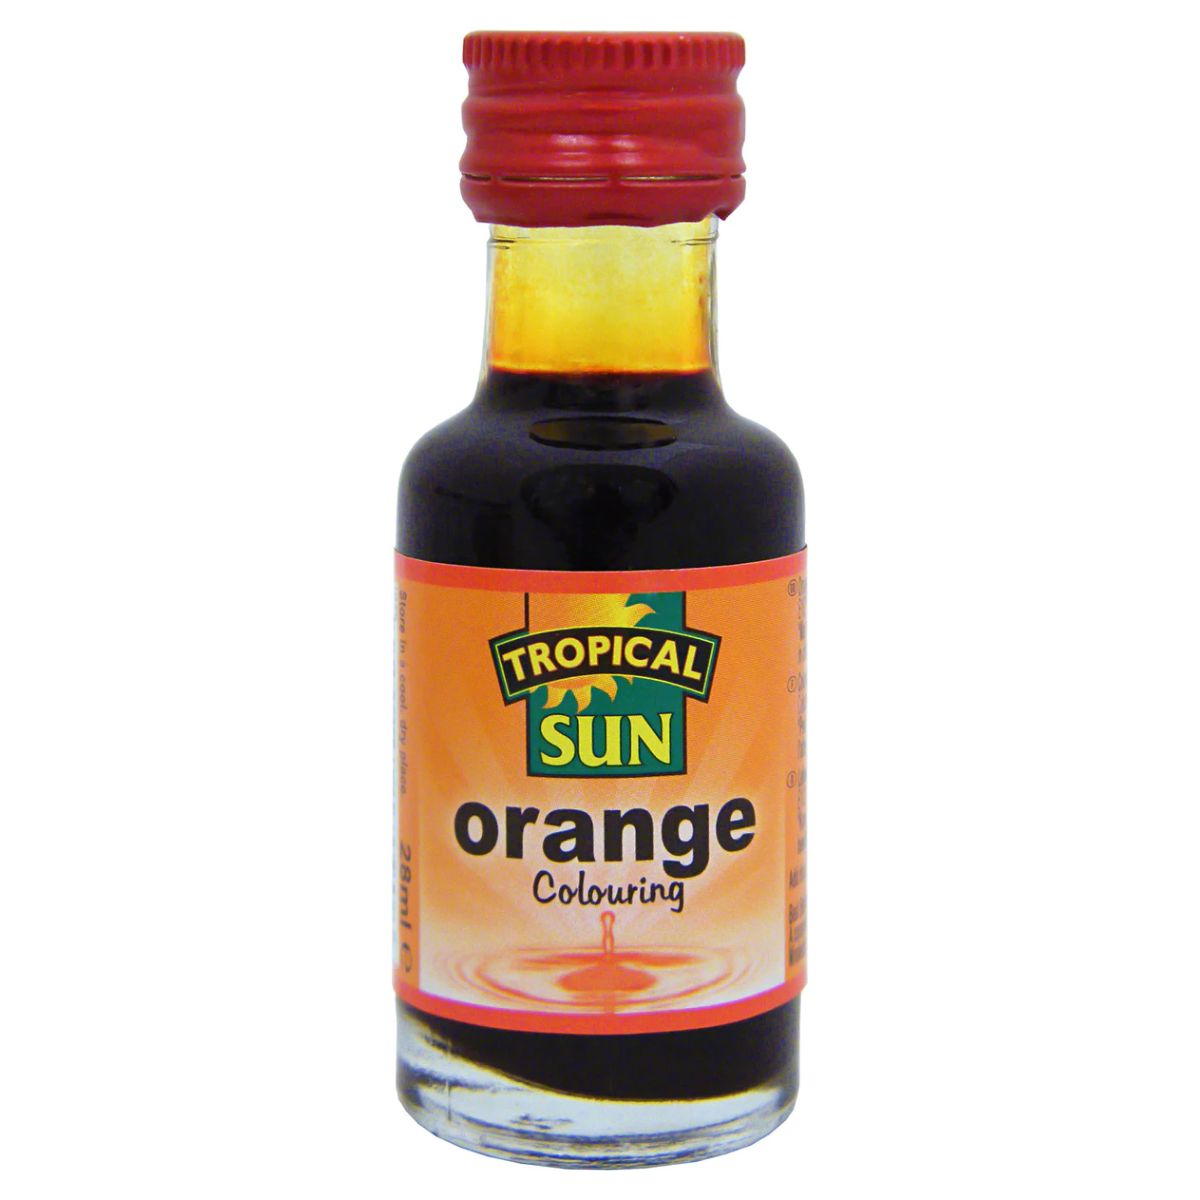 Sentence with replaced product name: A bottle of Tropical Sun - Orange Colouring - 28ml.